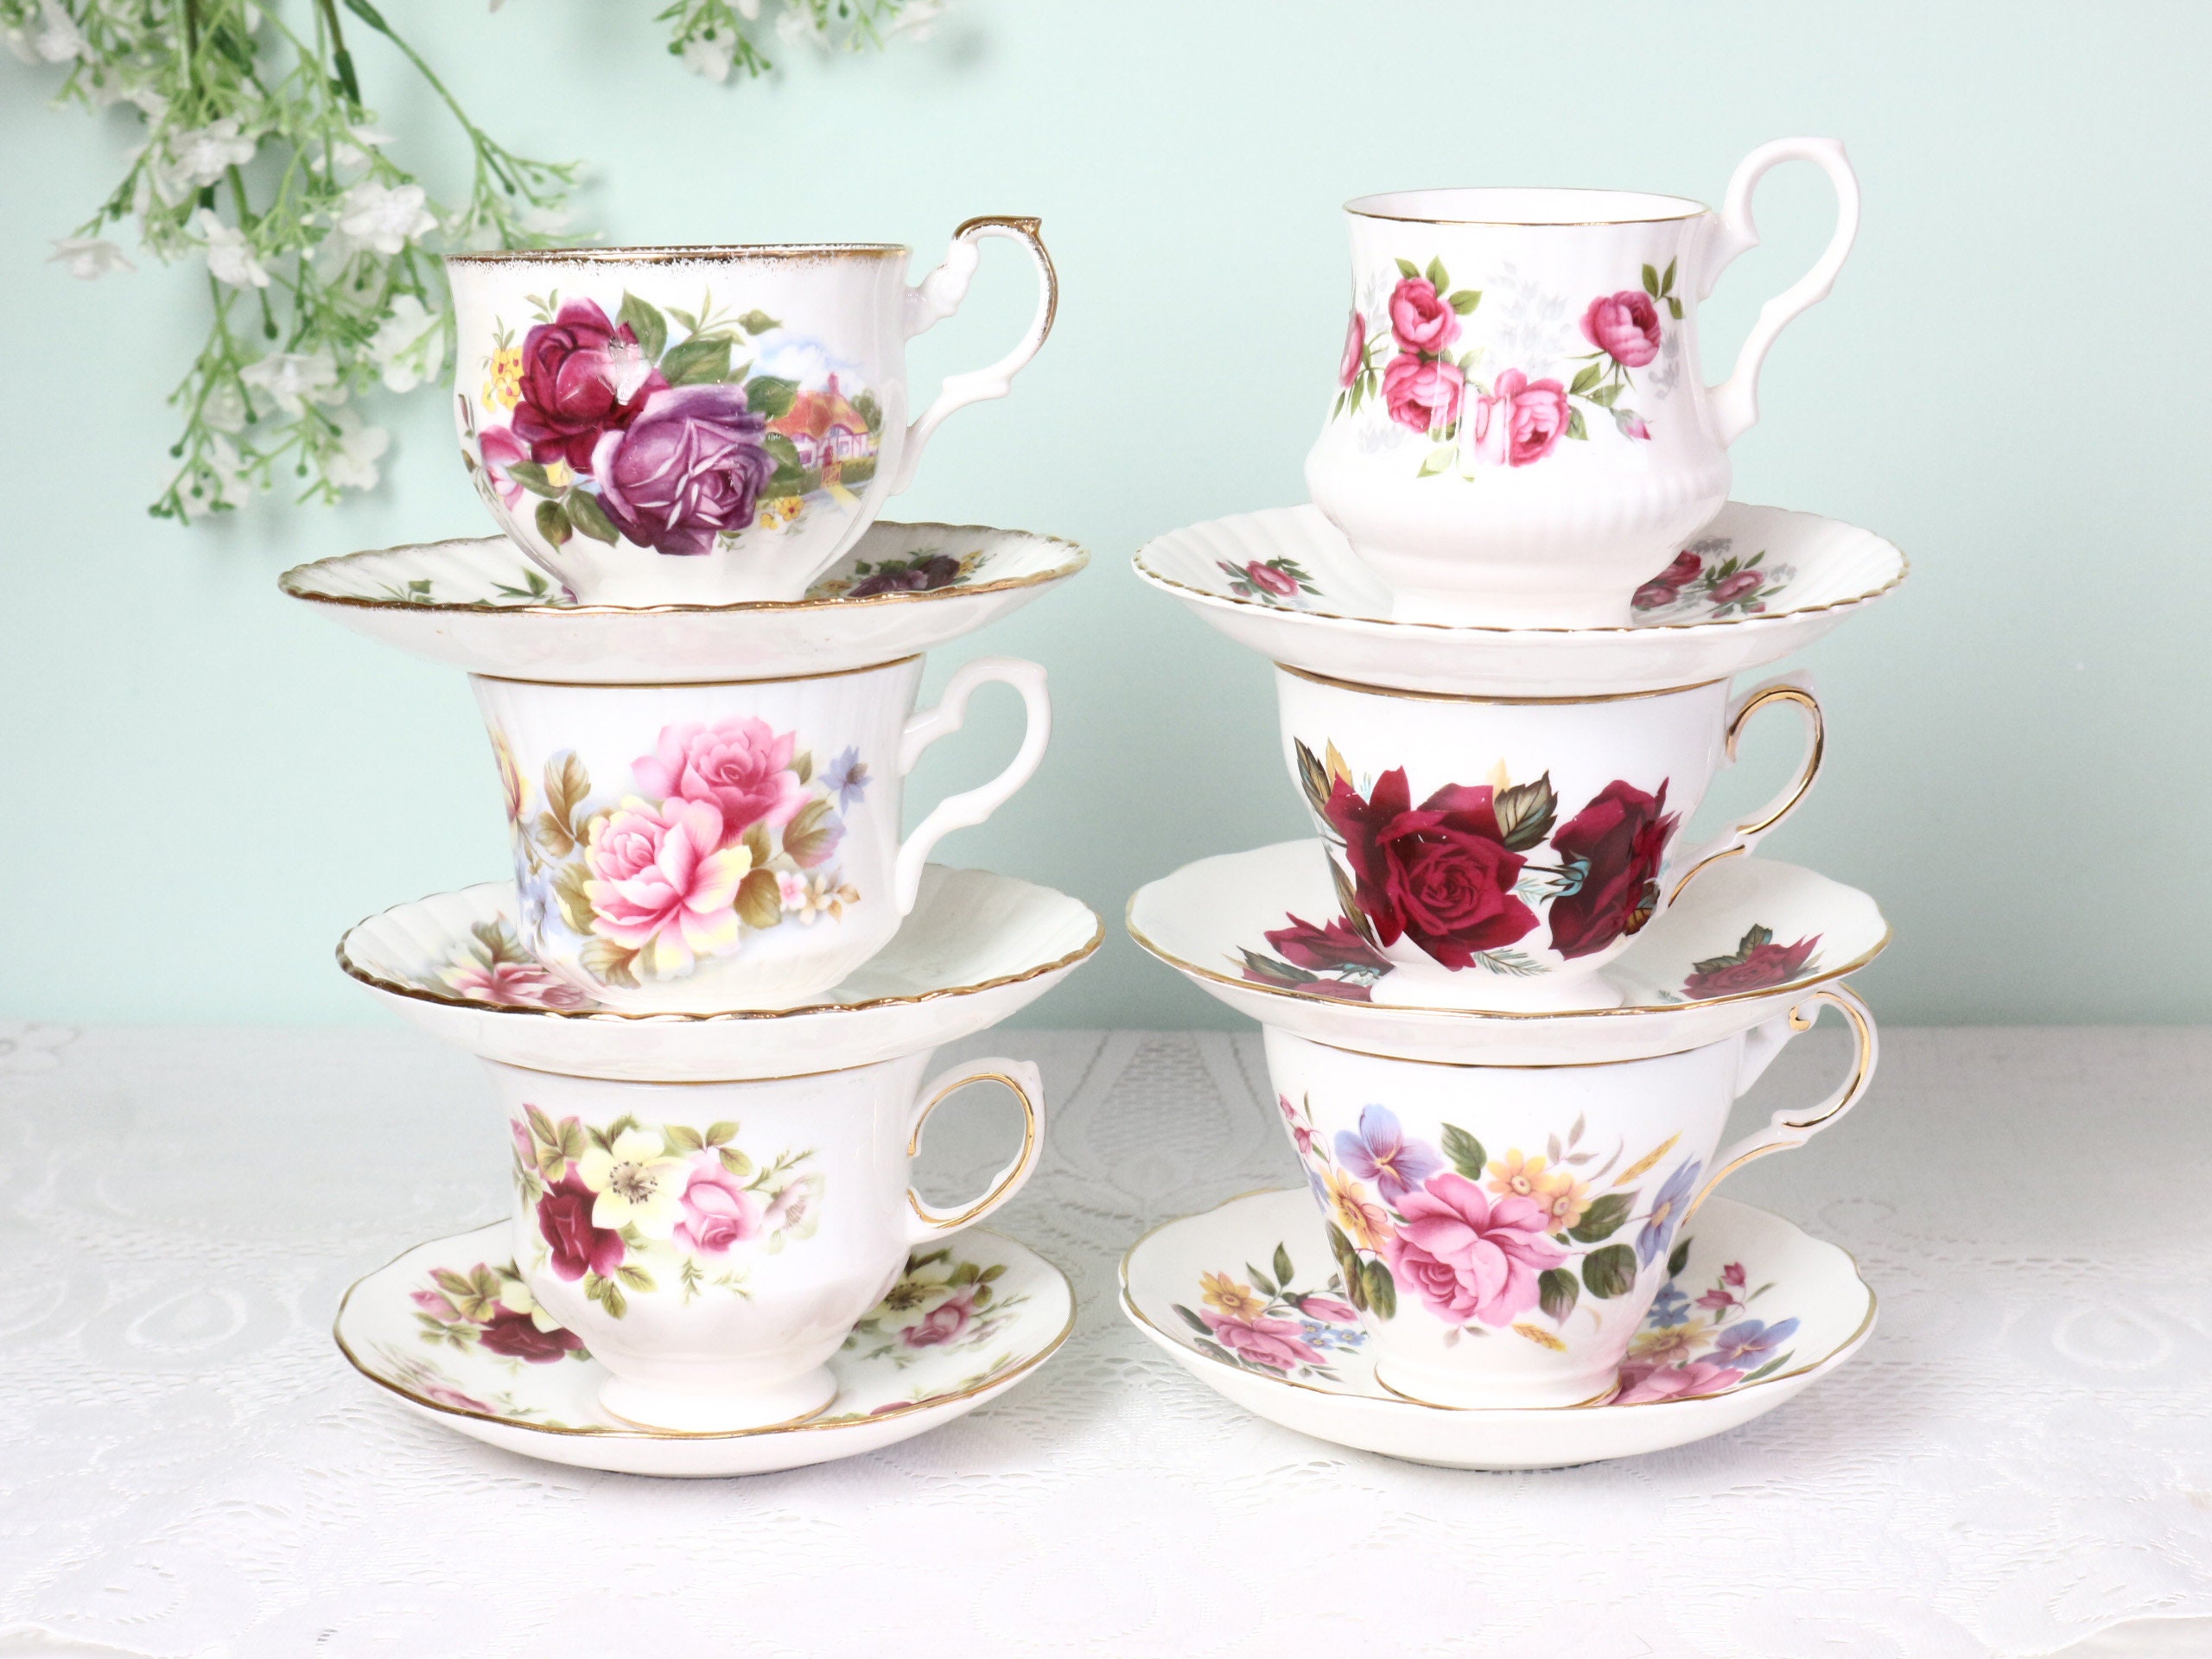 Cheval d’Orient set of 6 tea cups and saucers (n°1 to 6)